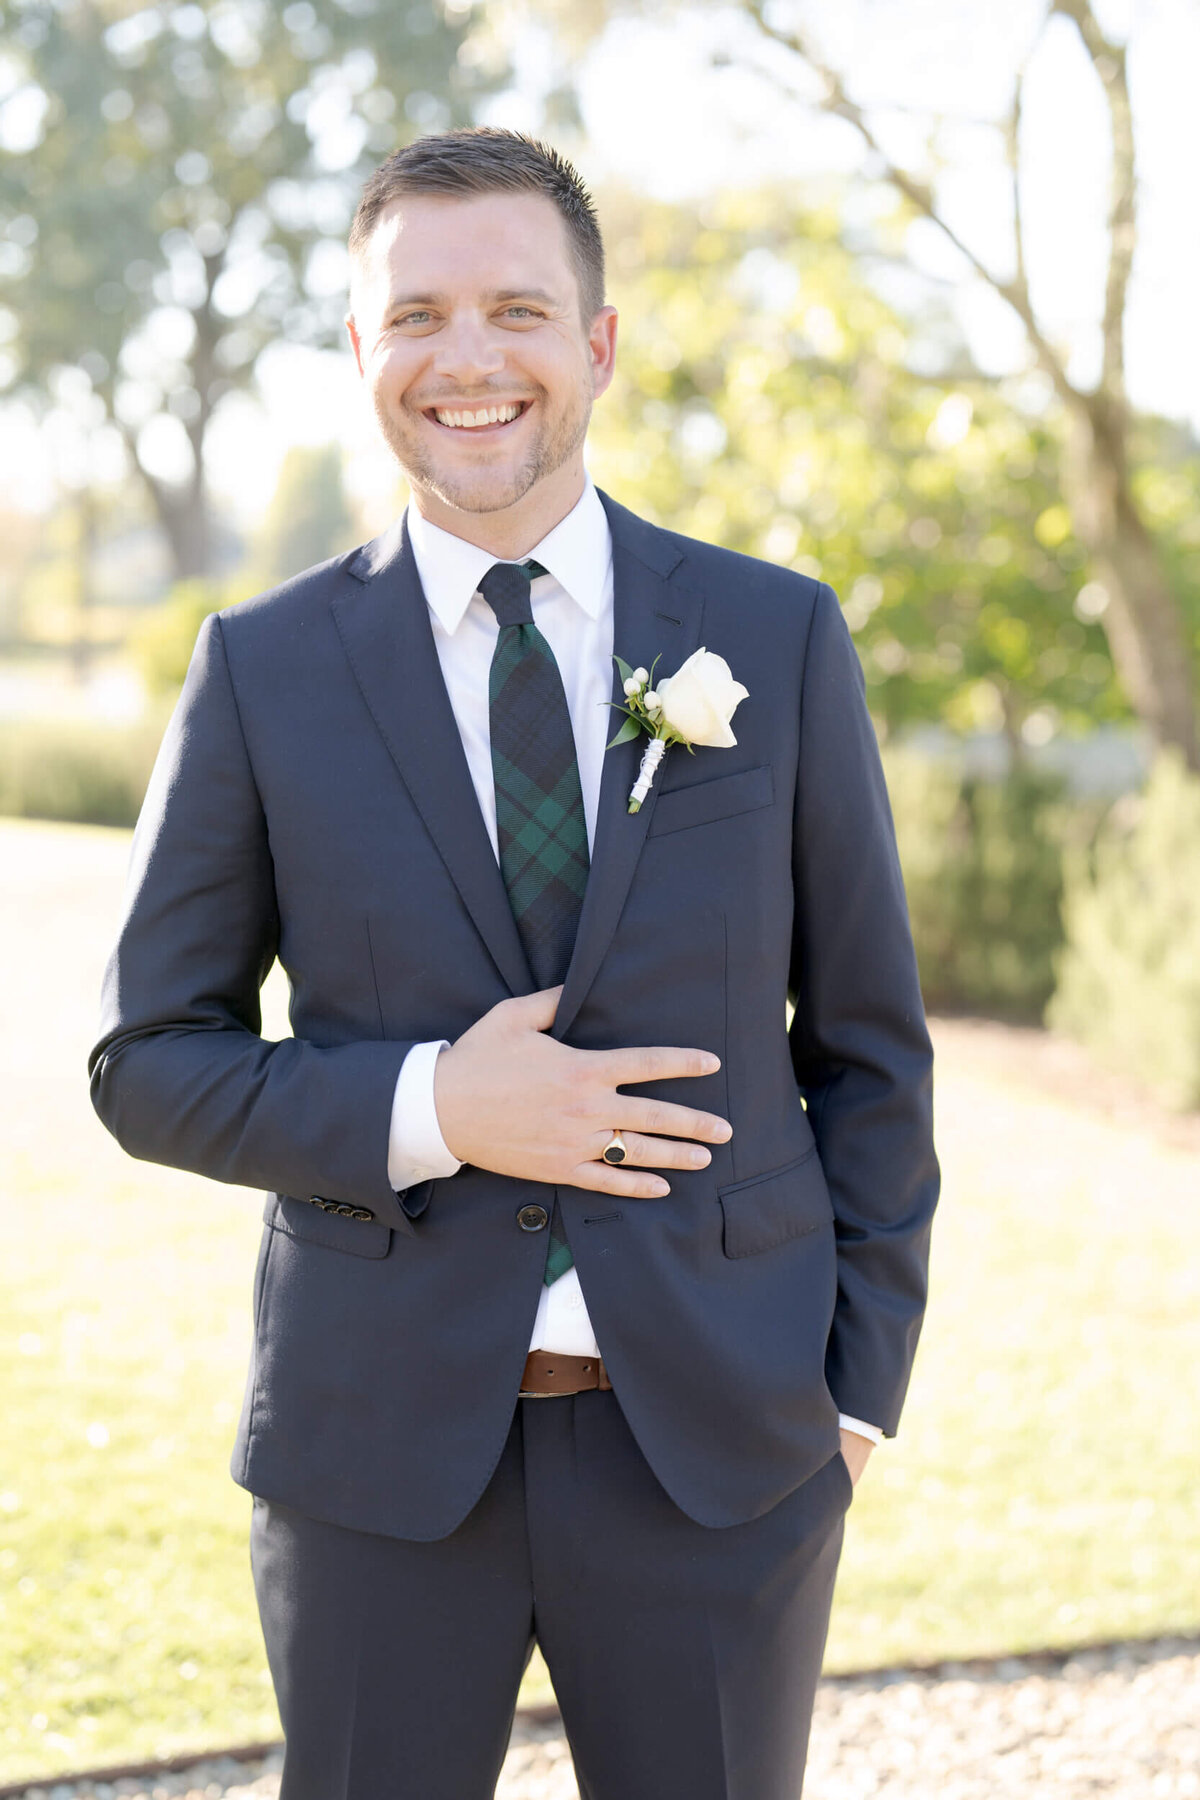 A happy bridegroom flaunts his wedding ring and suit in sunny outdoors.